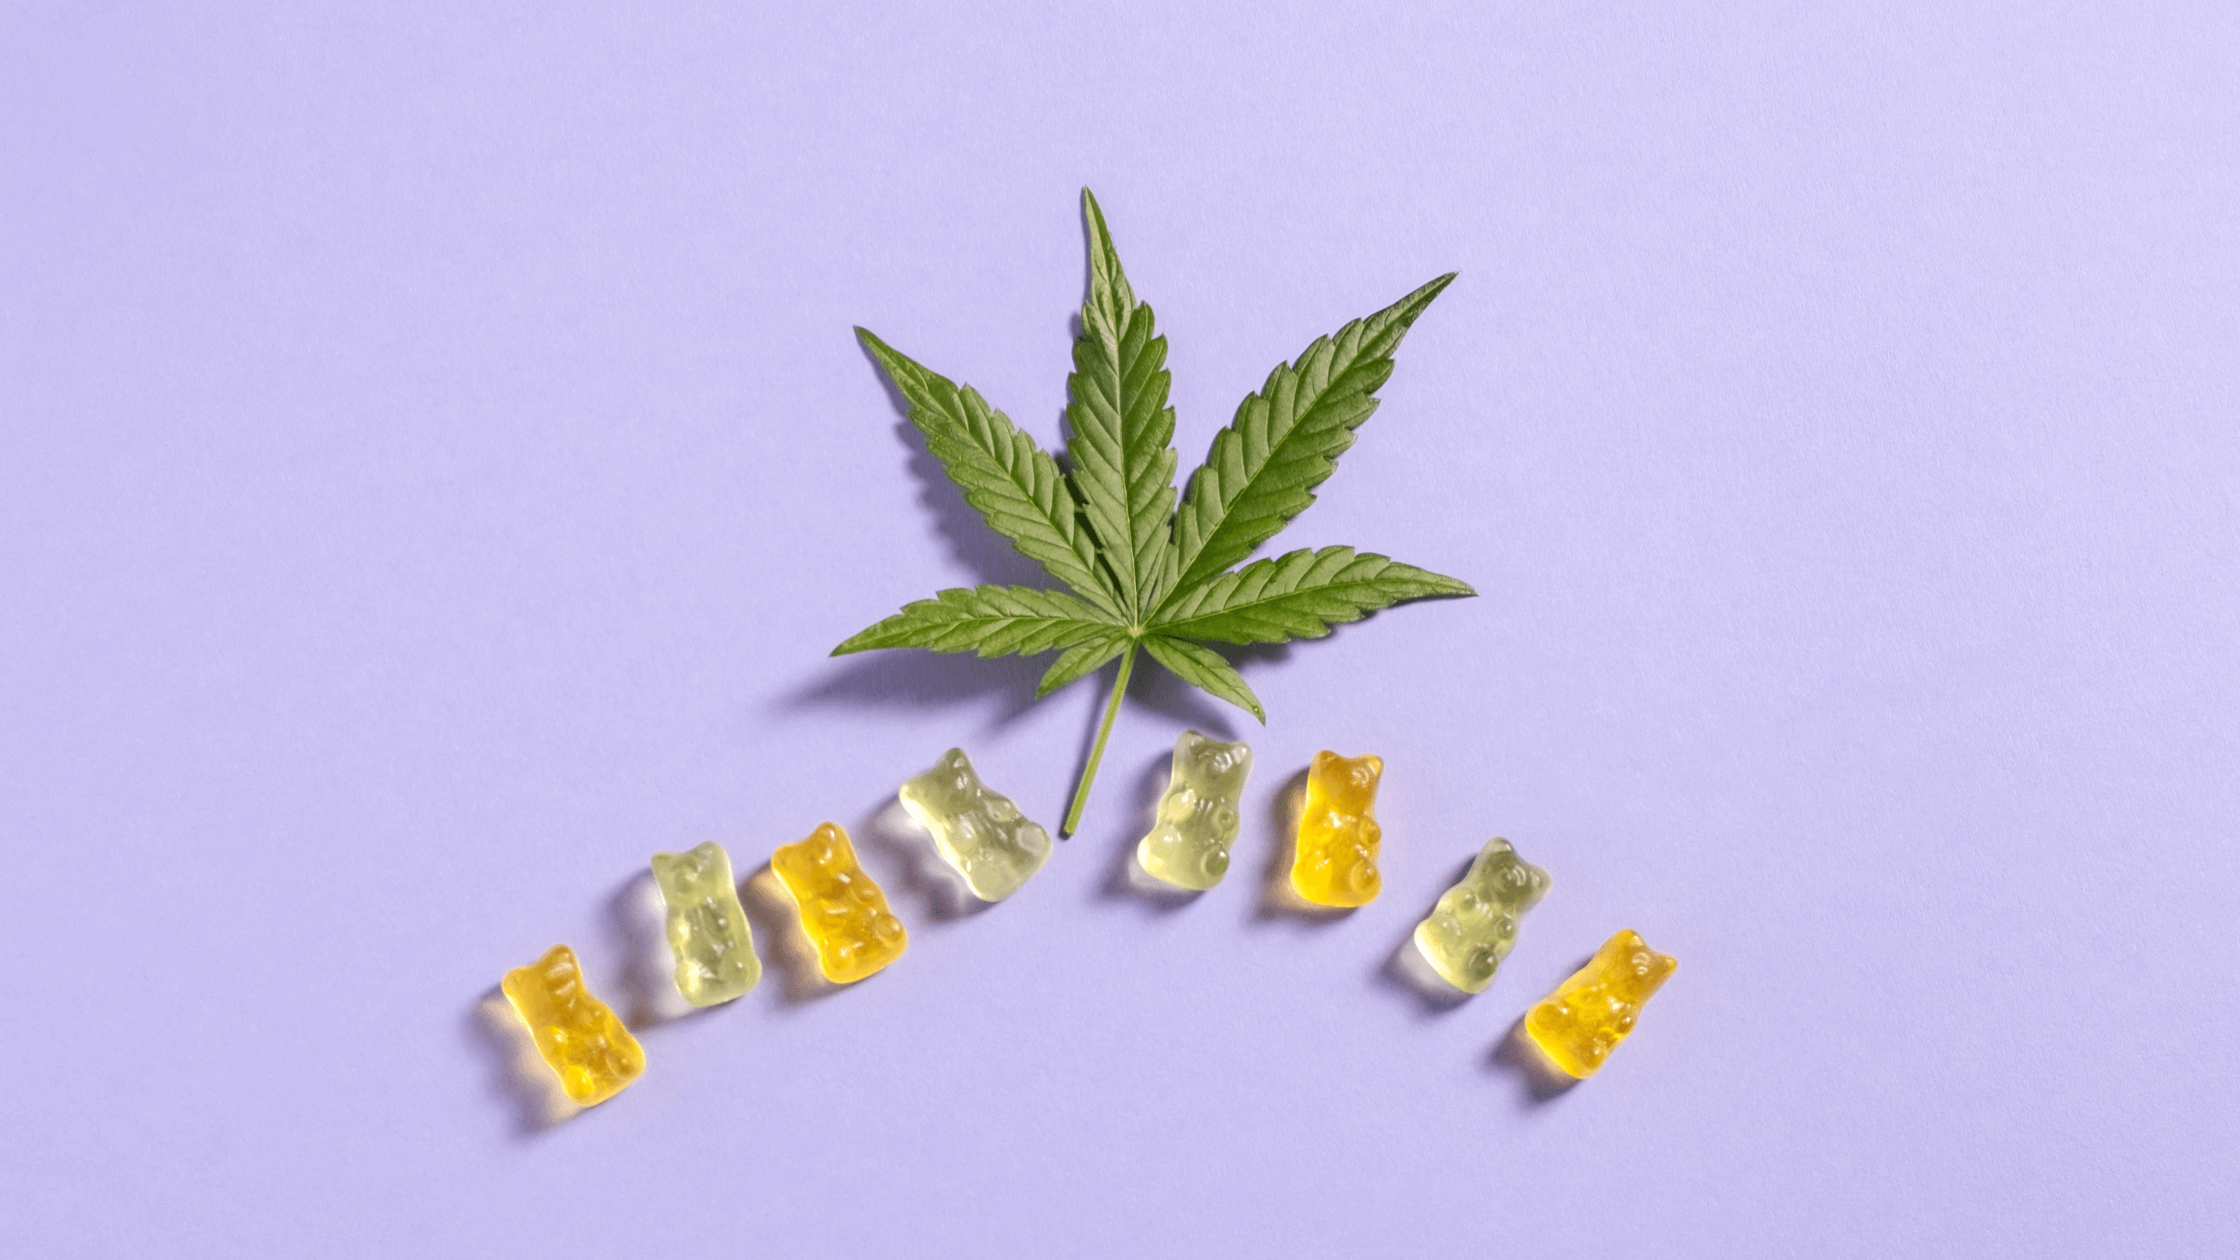 A THC plant and DIY cannabis infused gummy bears